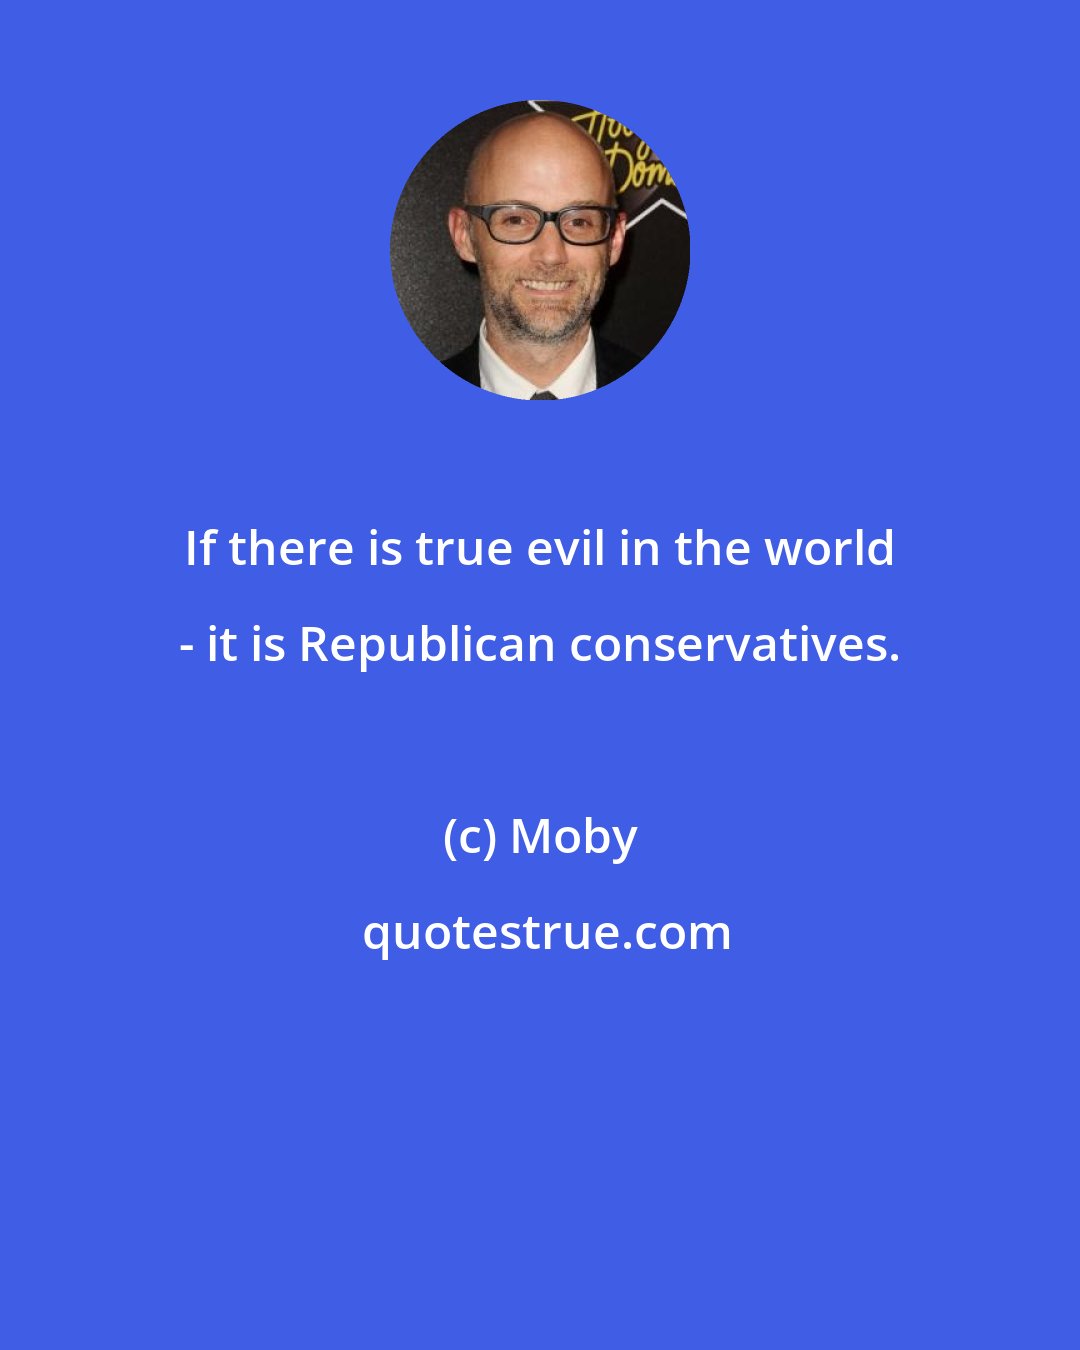 Moby: If there is true evil in the world - it is Republican conservatives.